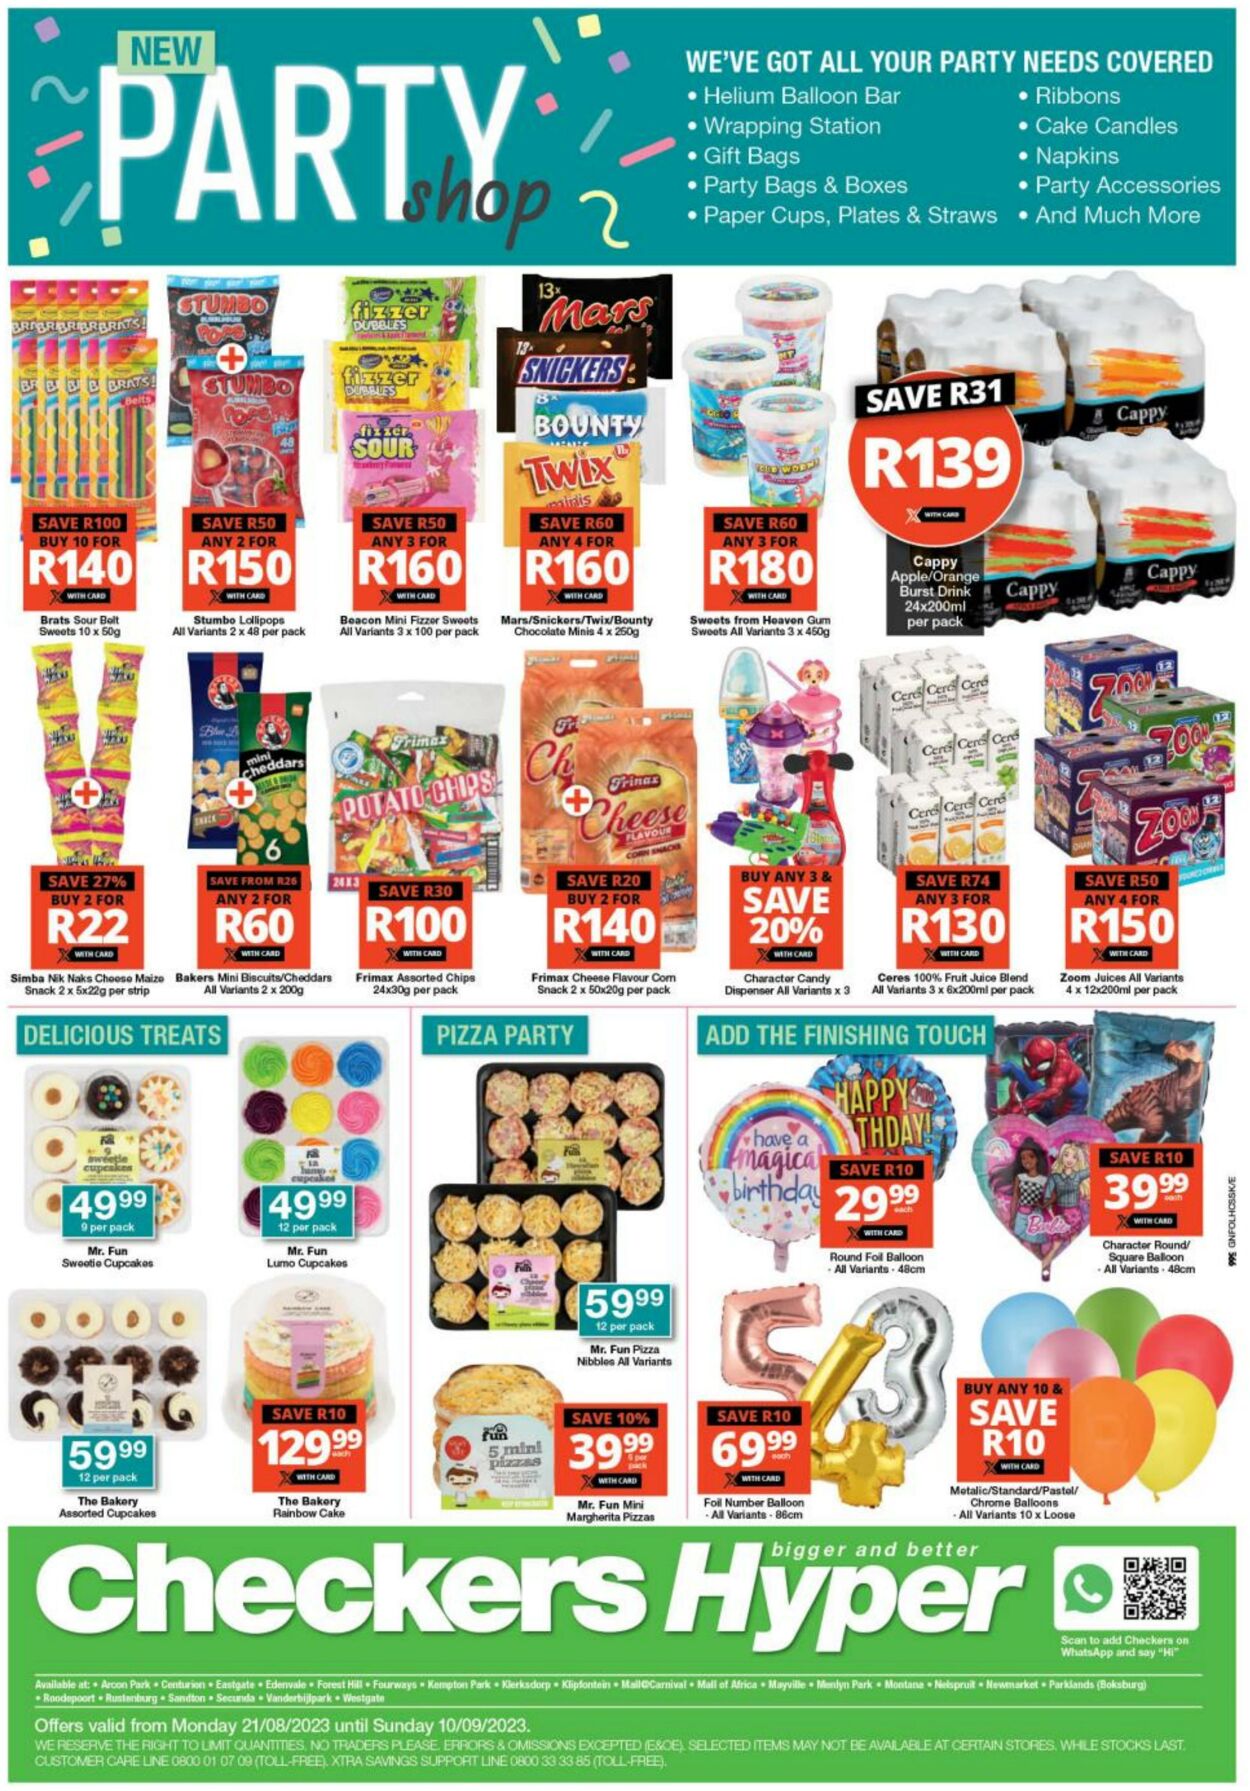 Checkers Promotional Leaflet - Valid from 21.08 to 10.09 - Page nb 1 ...